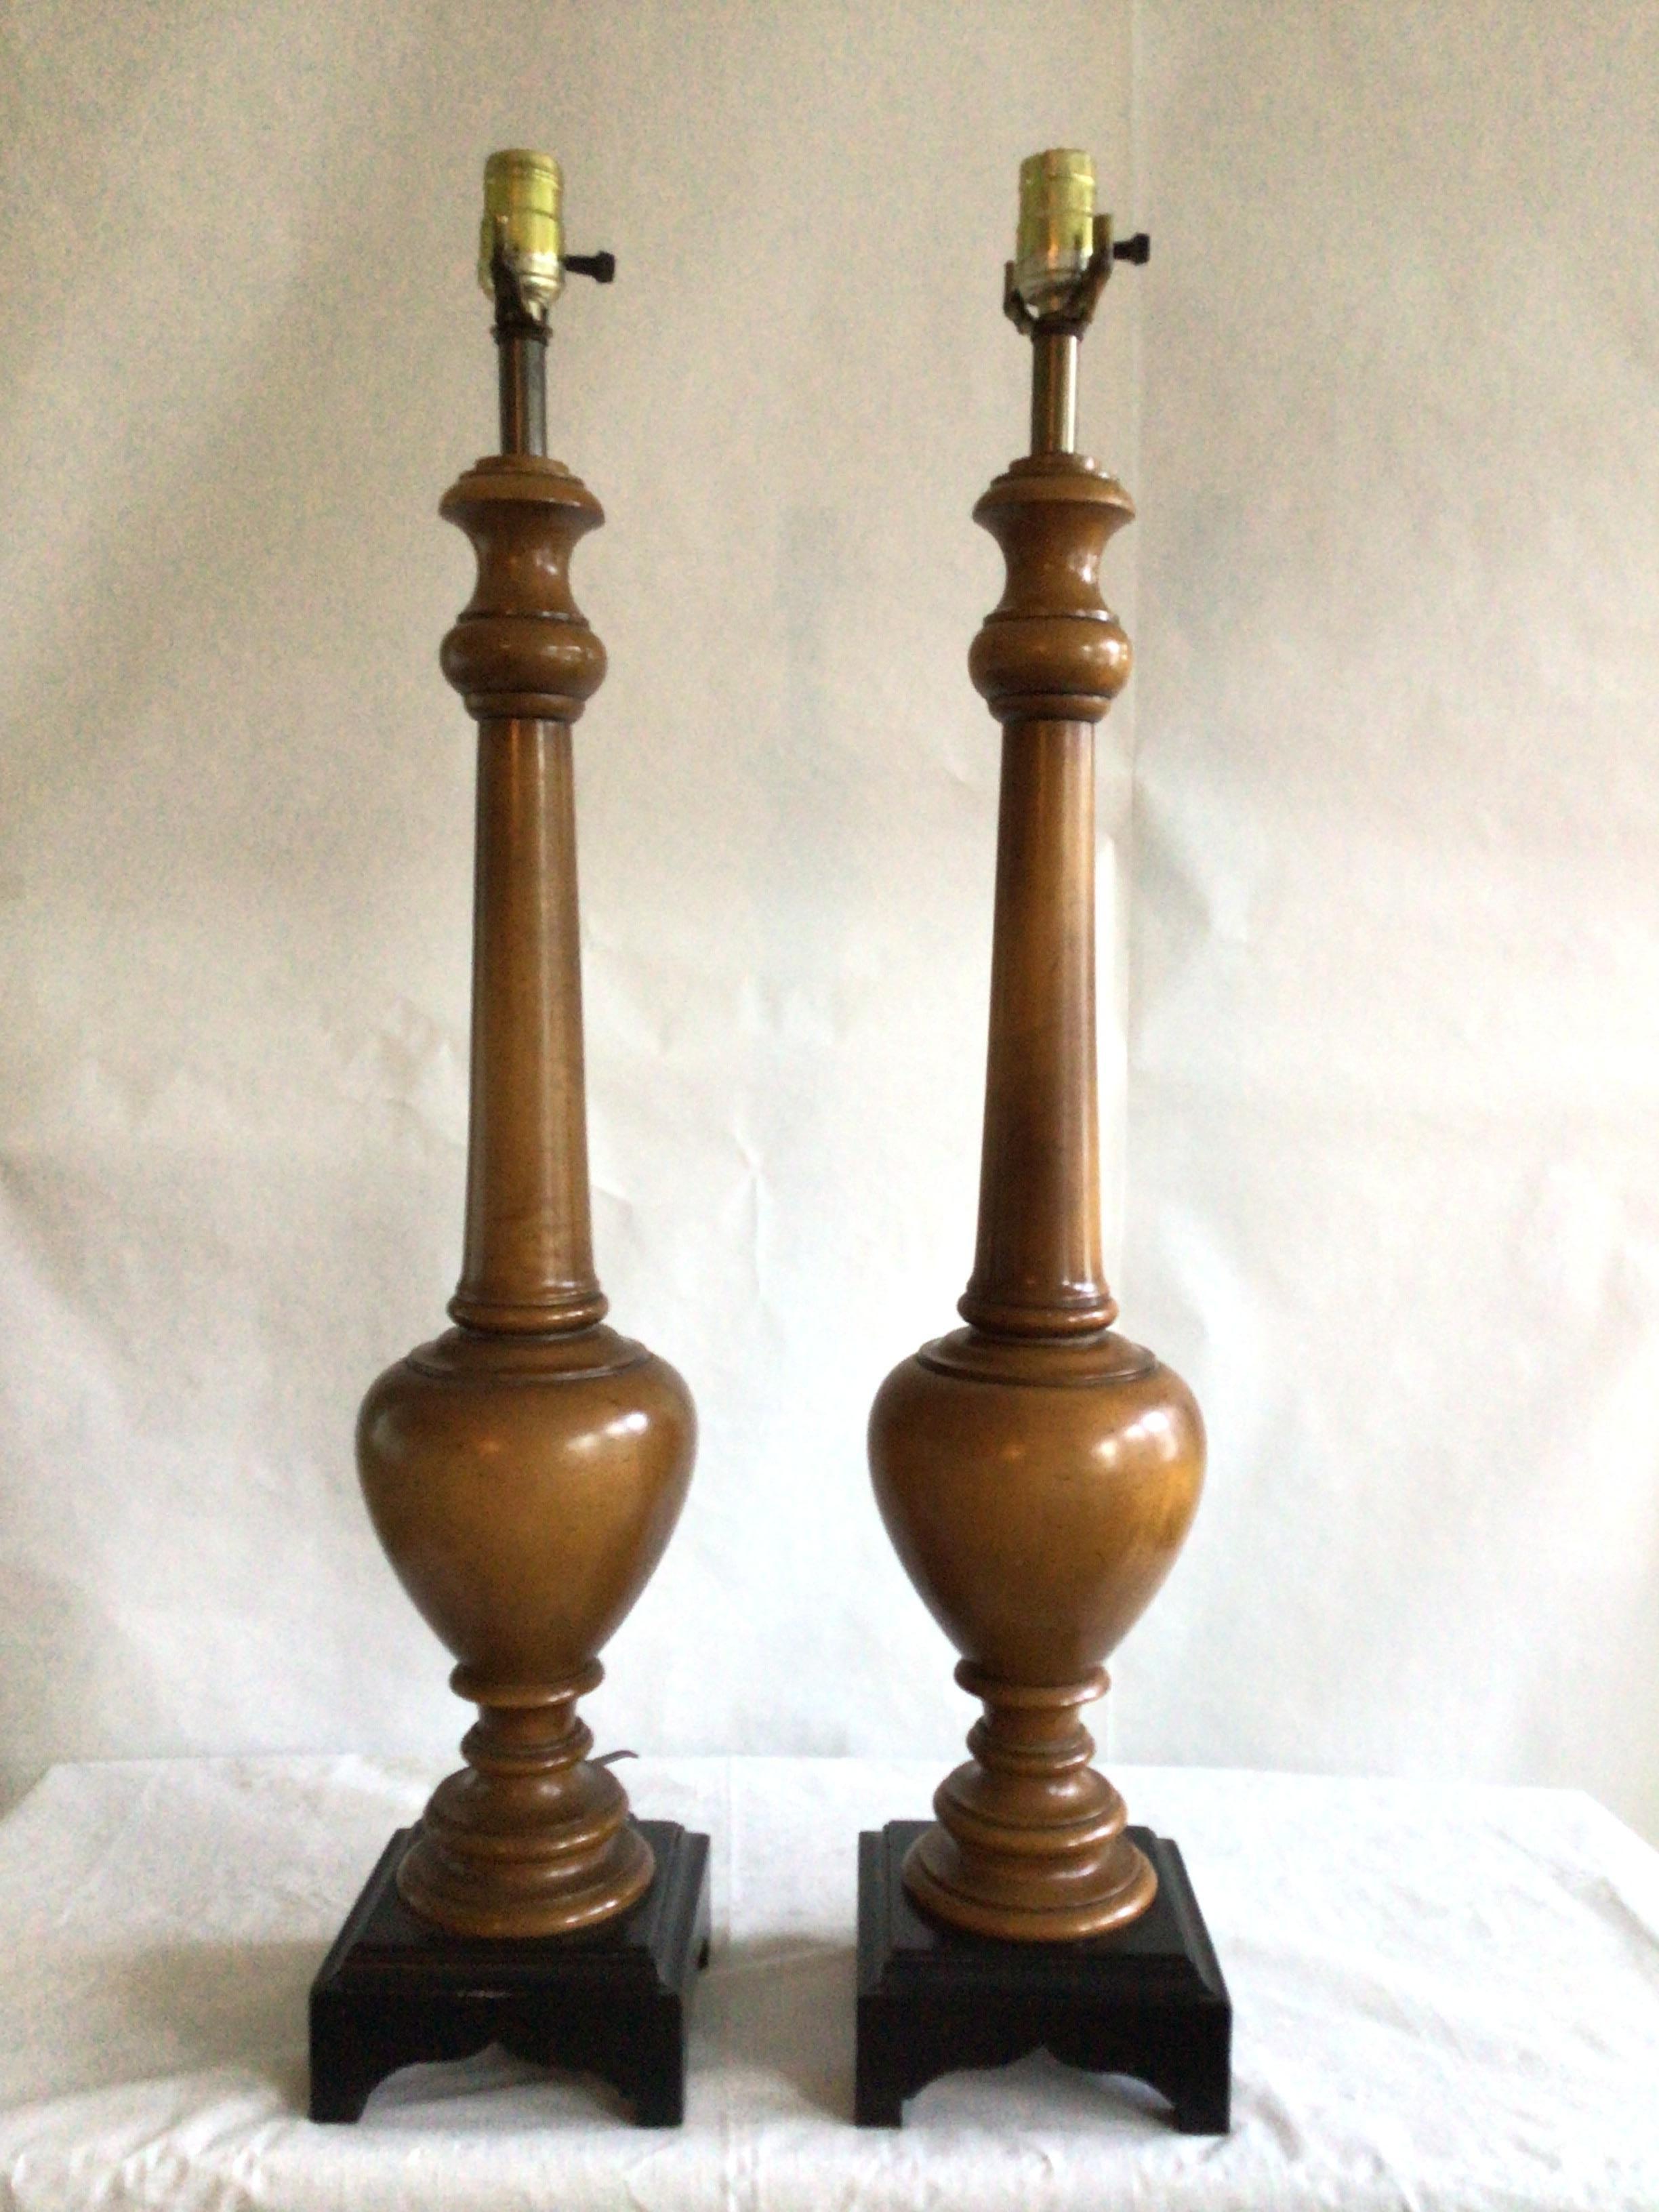 Pair of 1960s Wooden Lamps on Black Wood Base
Turned wood is accented by a black base for these pair of lamps 
A perfect choice where a pair of taller lamps and lighting is required
Needs Rewiring
Height to Top of Socket
